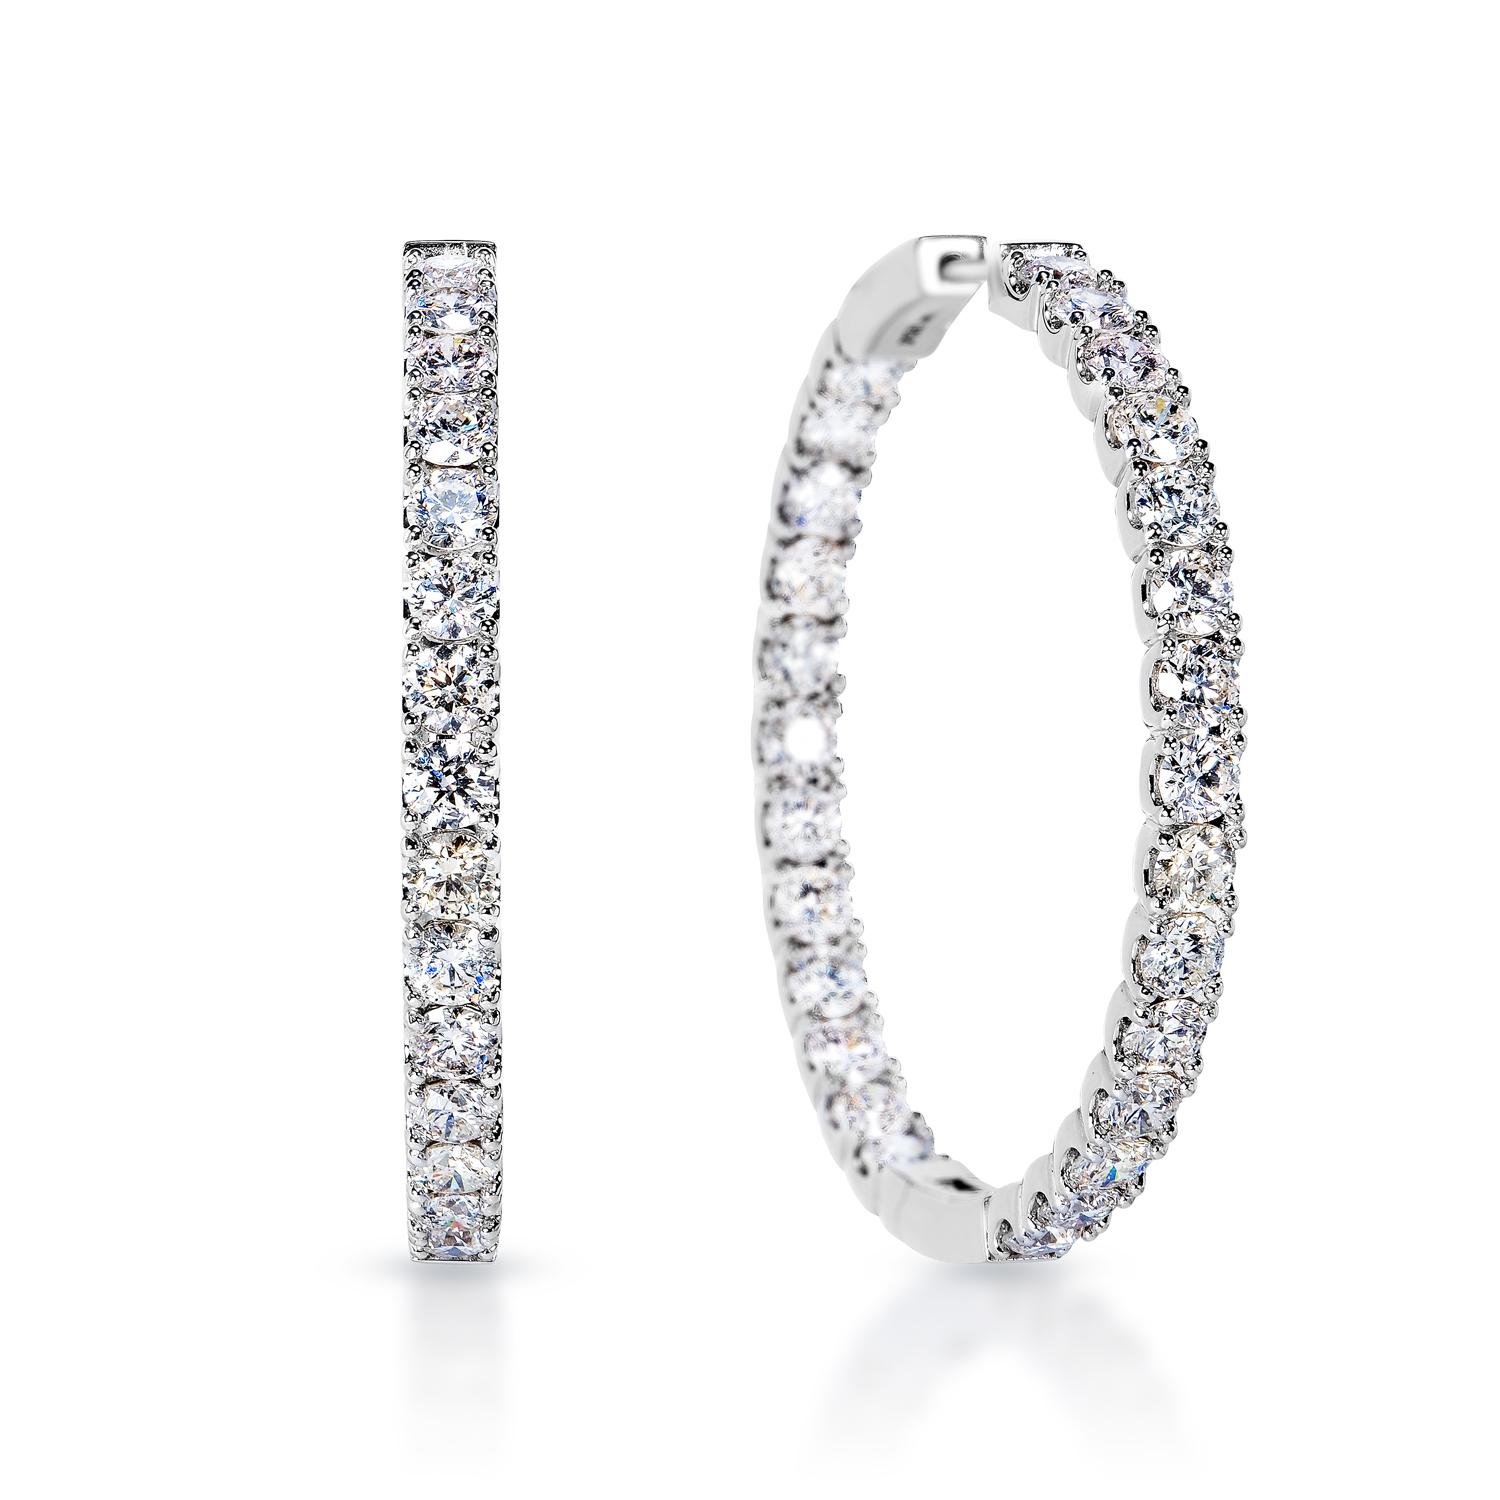 Looking for a pair of stunning diamond earrings? Look no further than these earth-mined diamond earrings, featuring 10.84 carats of bright and brilliant round brilliant cut diamonds set in beautiful 14-karat white gold. With their dazzling sparkle